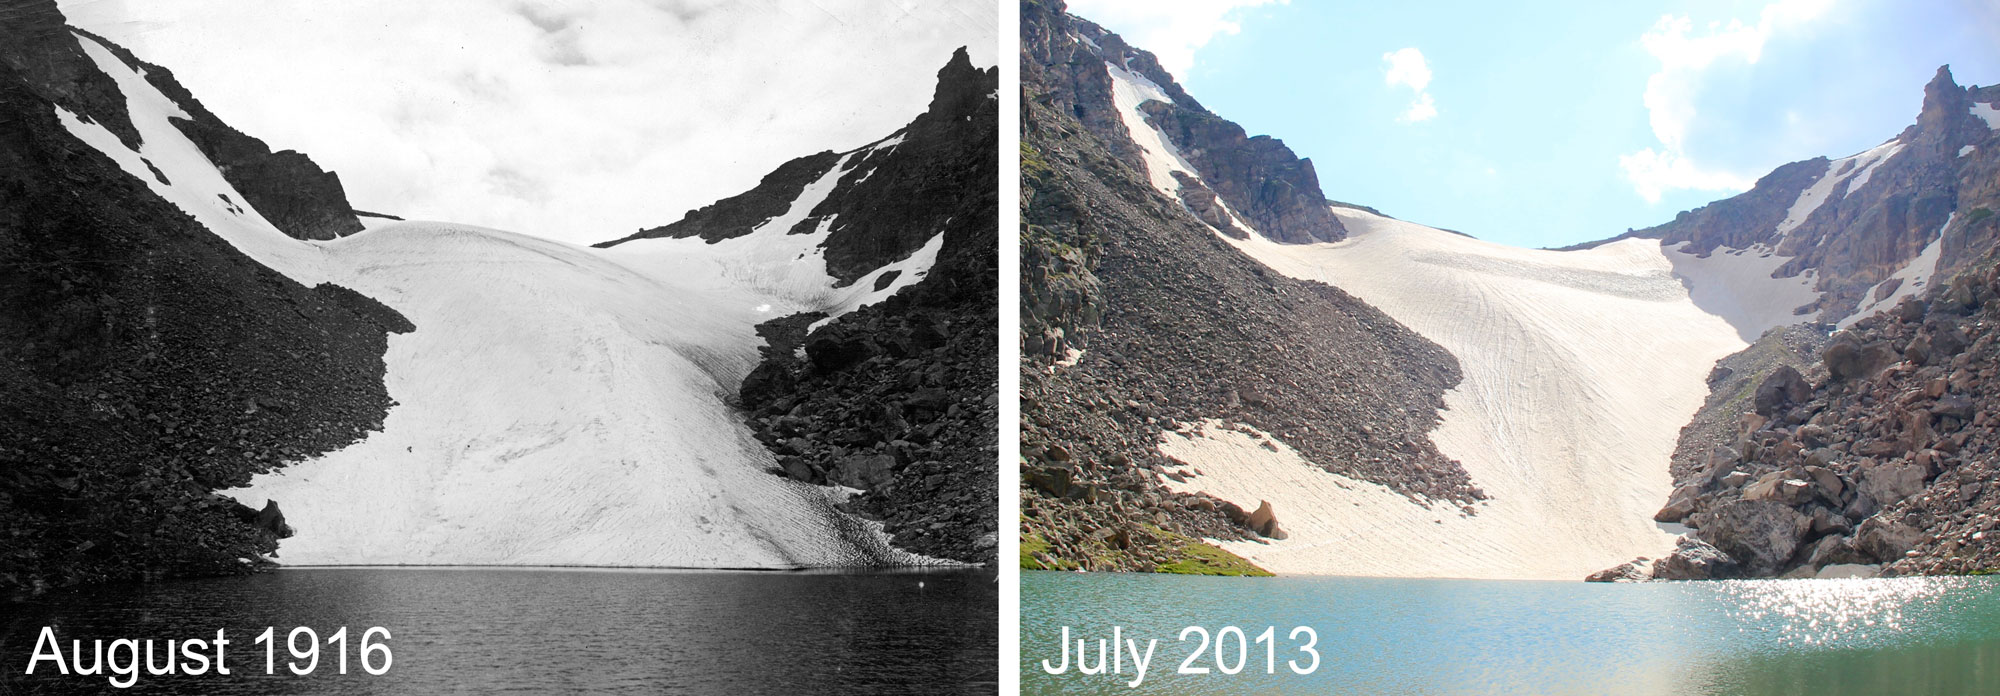 2-panel image showing Andrews Glacier in August 1916 (left) and July 2013 (right). The glacier occurs in a saddle between two slopes and flows downhill, ending at the shore of a lake. In 1916, the glacier appears slightly more massive than in 2013.